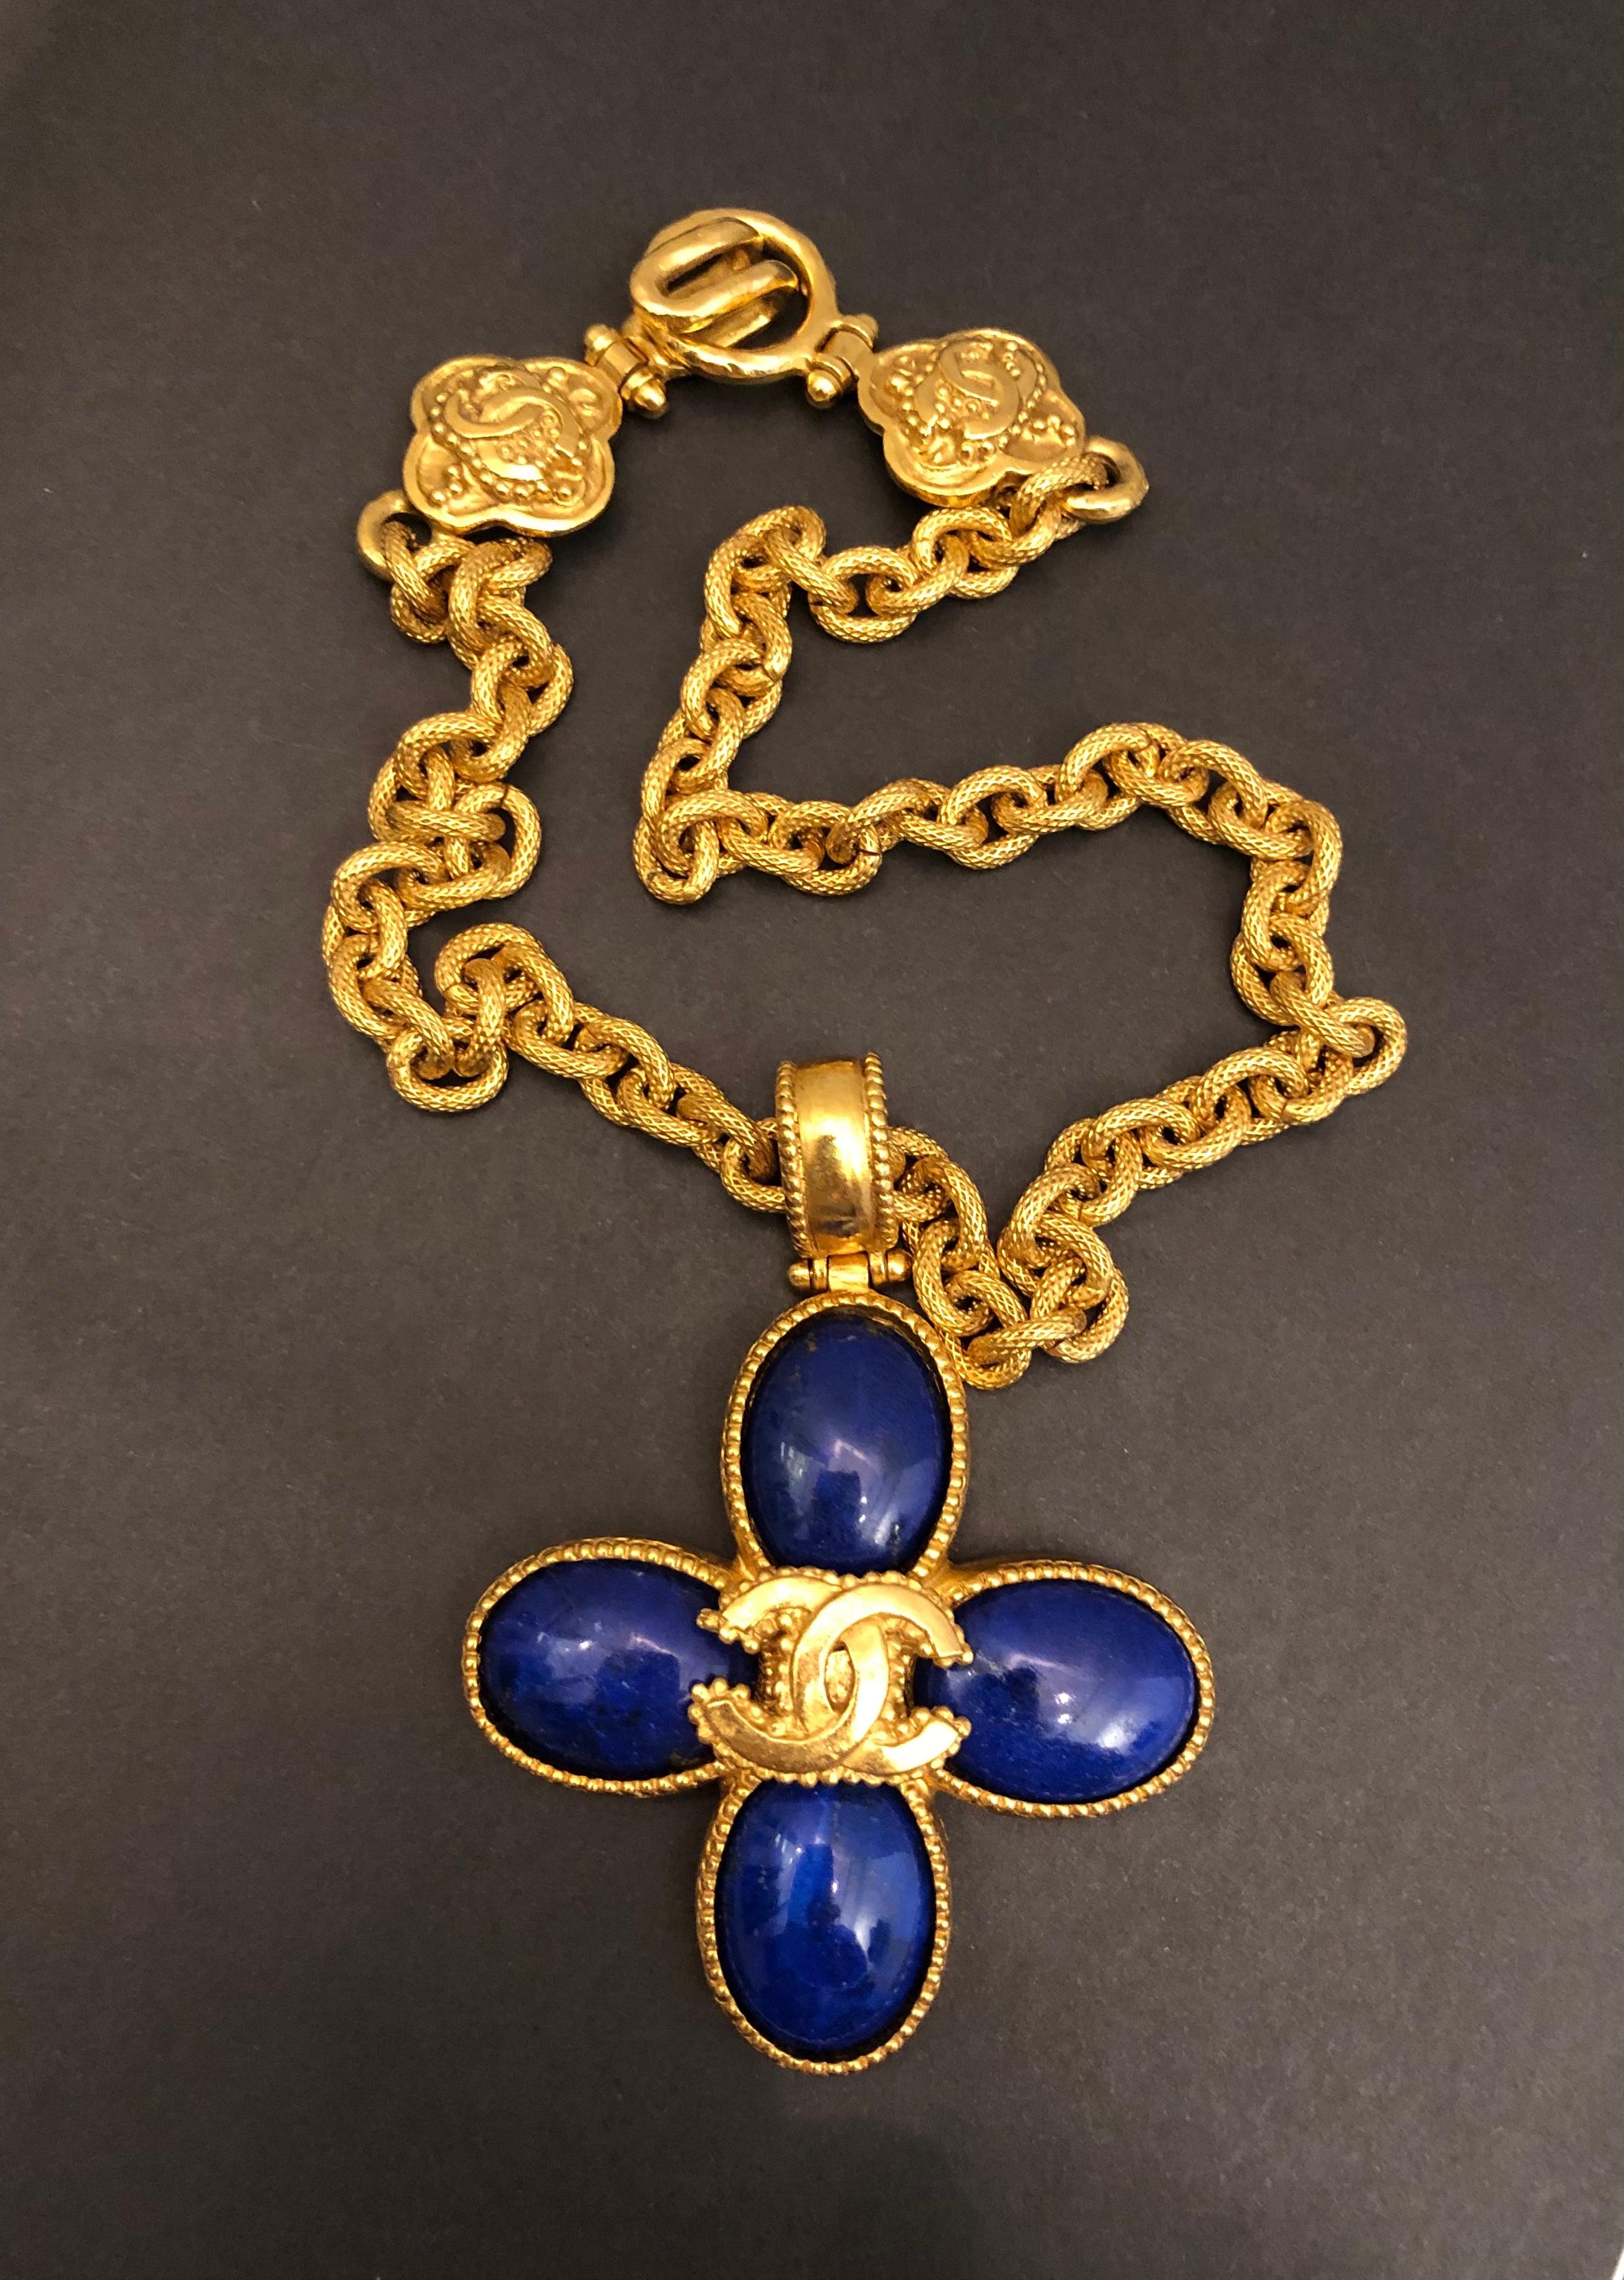 This vintage Chanel chain necklace is crafted of gold toned textured chain featuring a gold toned CC logo resting on an iconic Chanel clover charm in blue lapis lazuli stone. Stamped 96A made in France. Measures 42 cm in length Clover charm 7.1 x